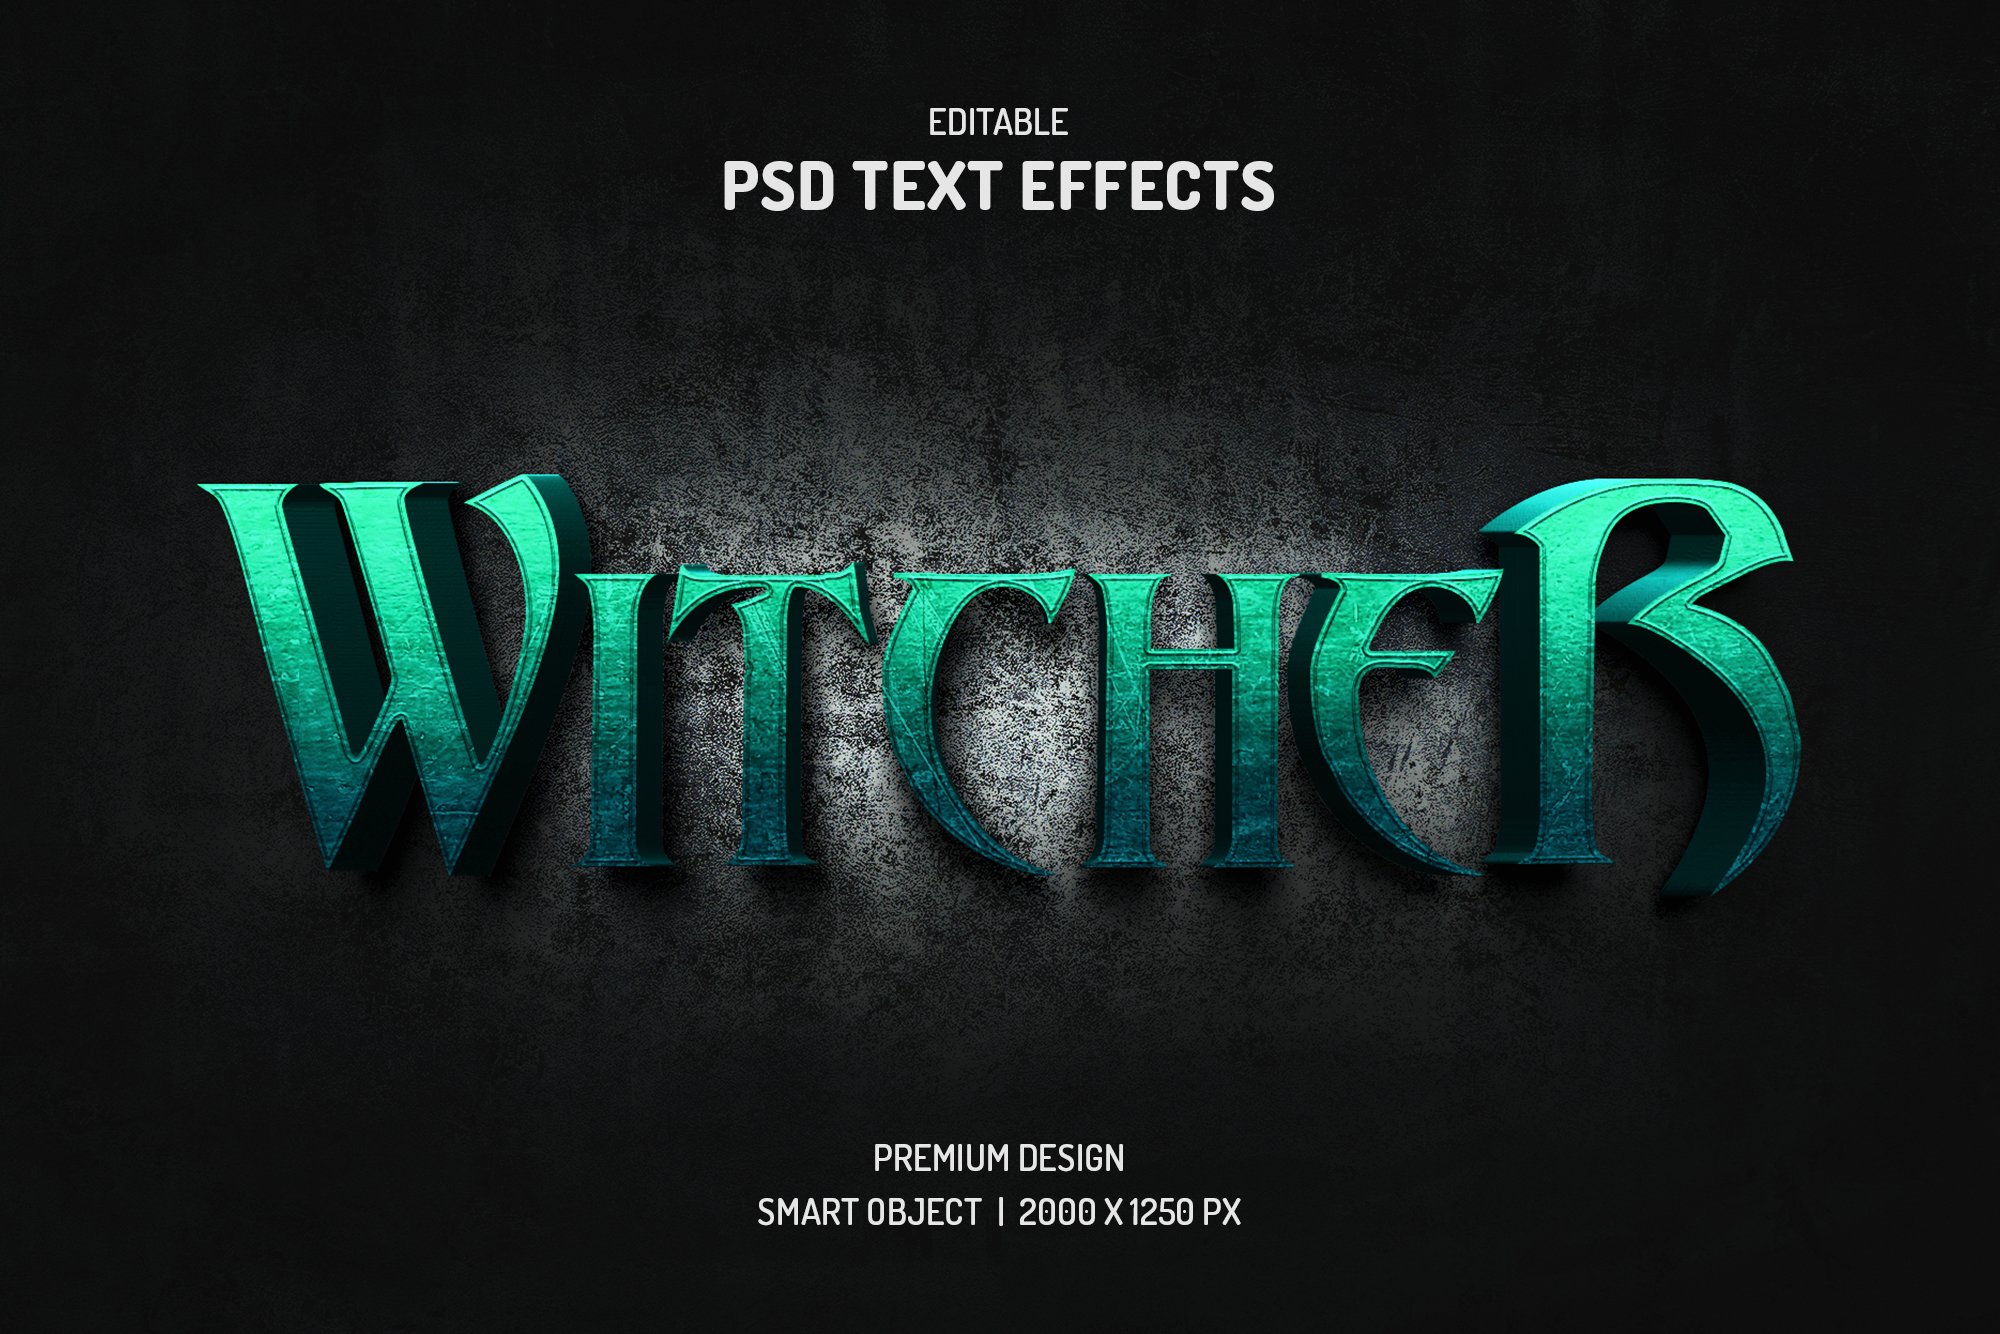 Editable 3d text effectcover image.